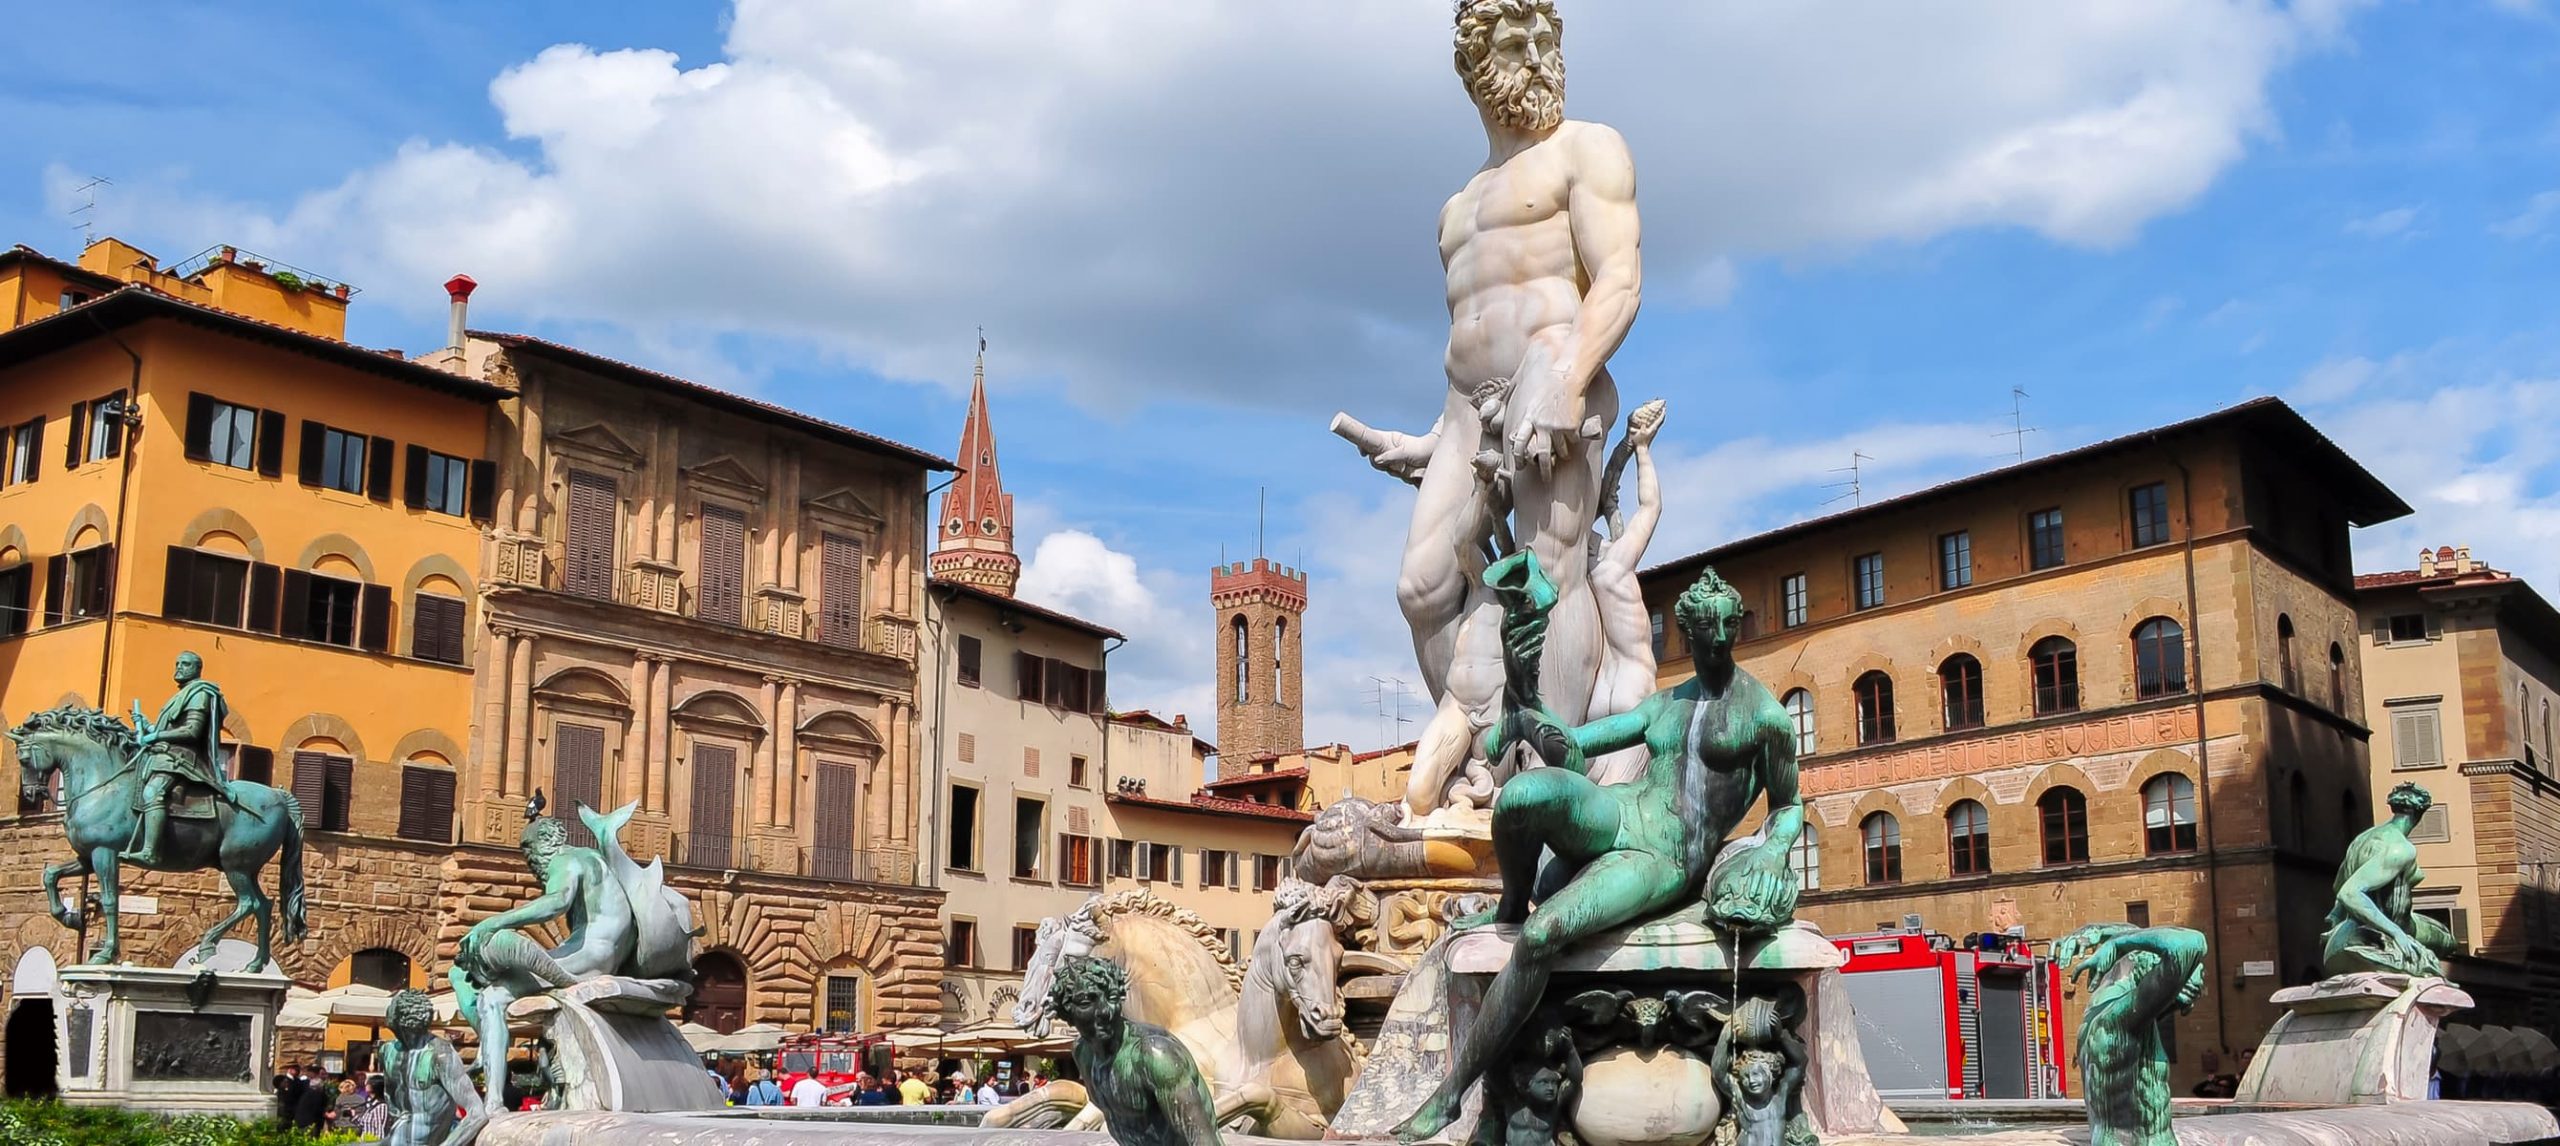 Top 6 Things to See In Piazza Della Signoria, Florence